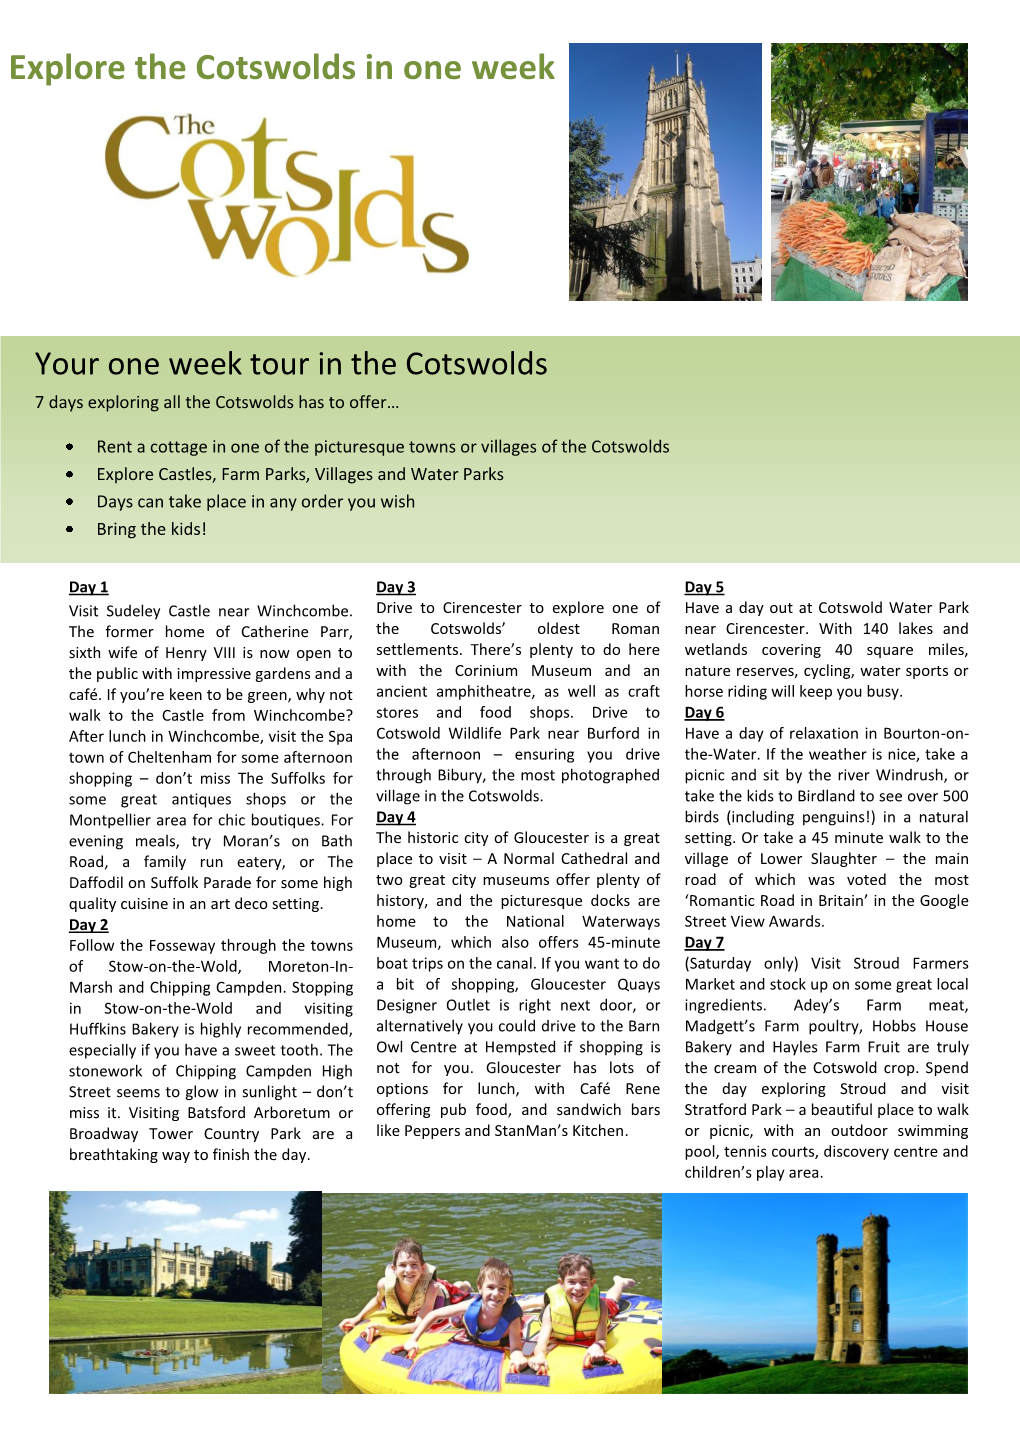 Explore the Cotswolds in One Week